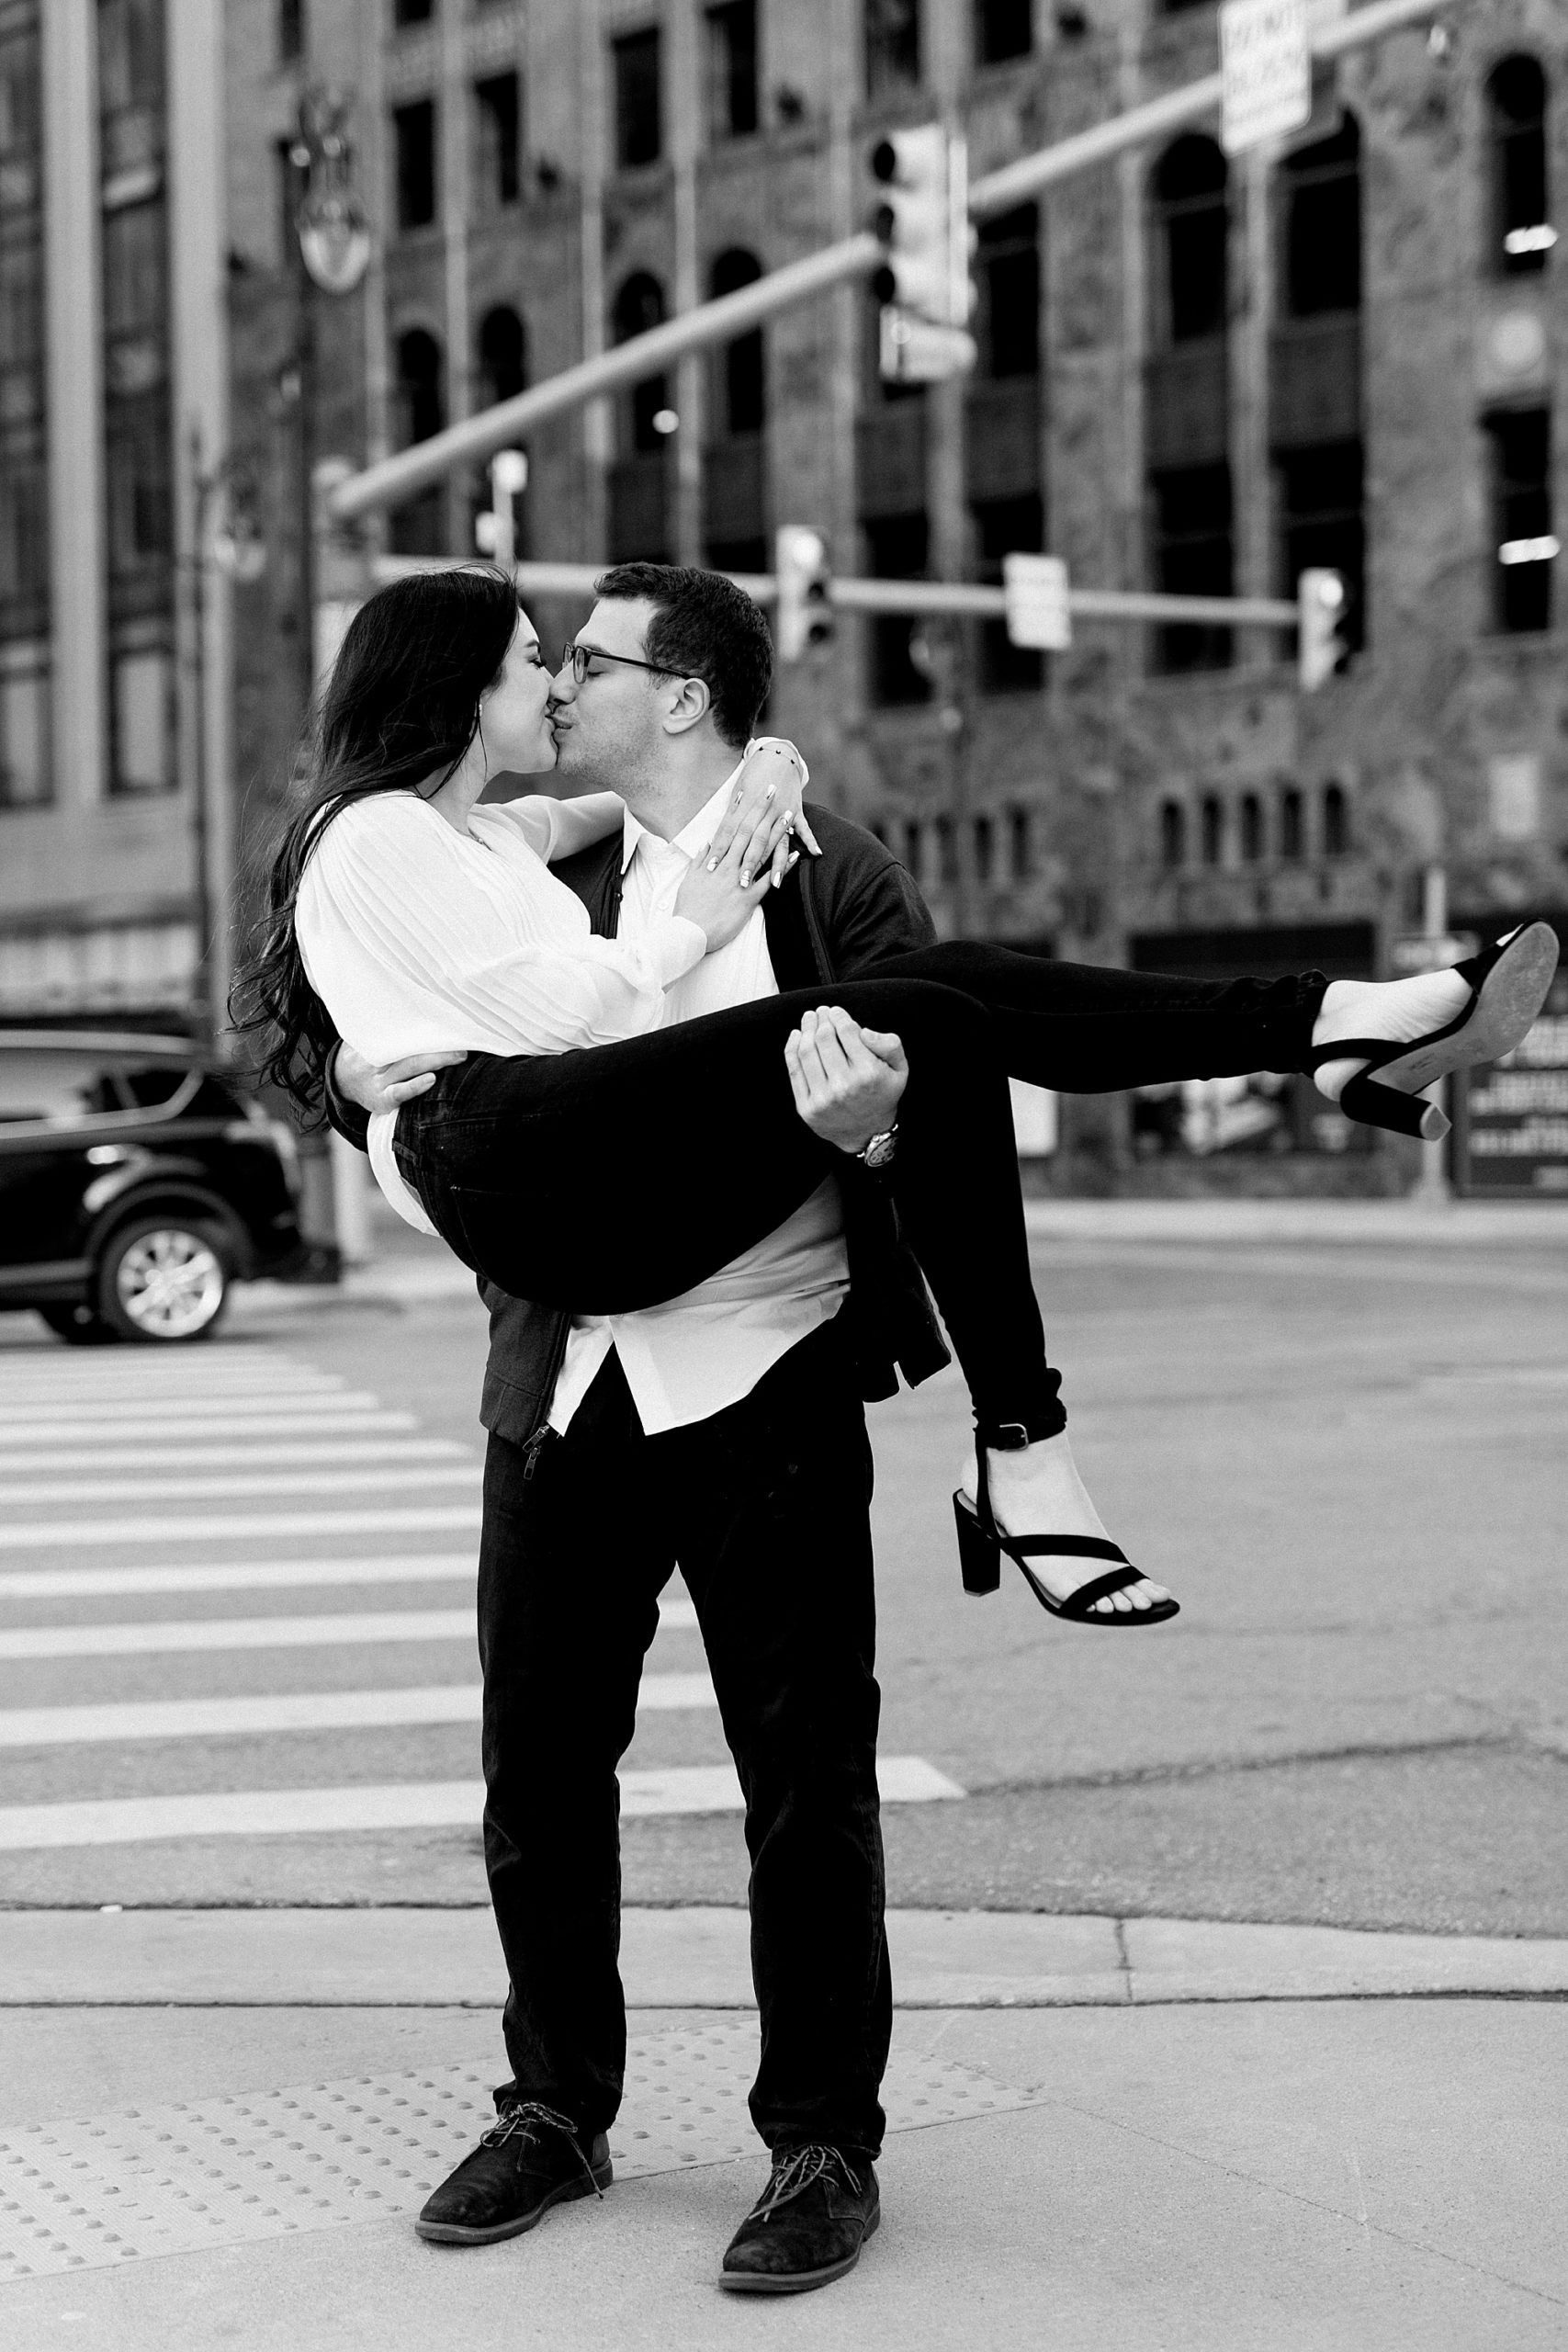 A late winter Downtown Detroit engagement at Wayne State University and the Detroit Institute of Arts by Breanne Rochelle Photography.